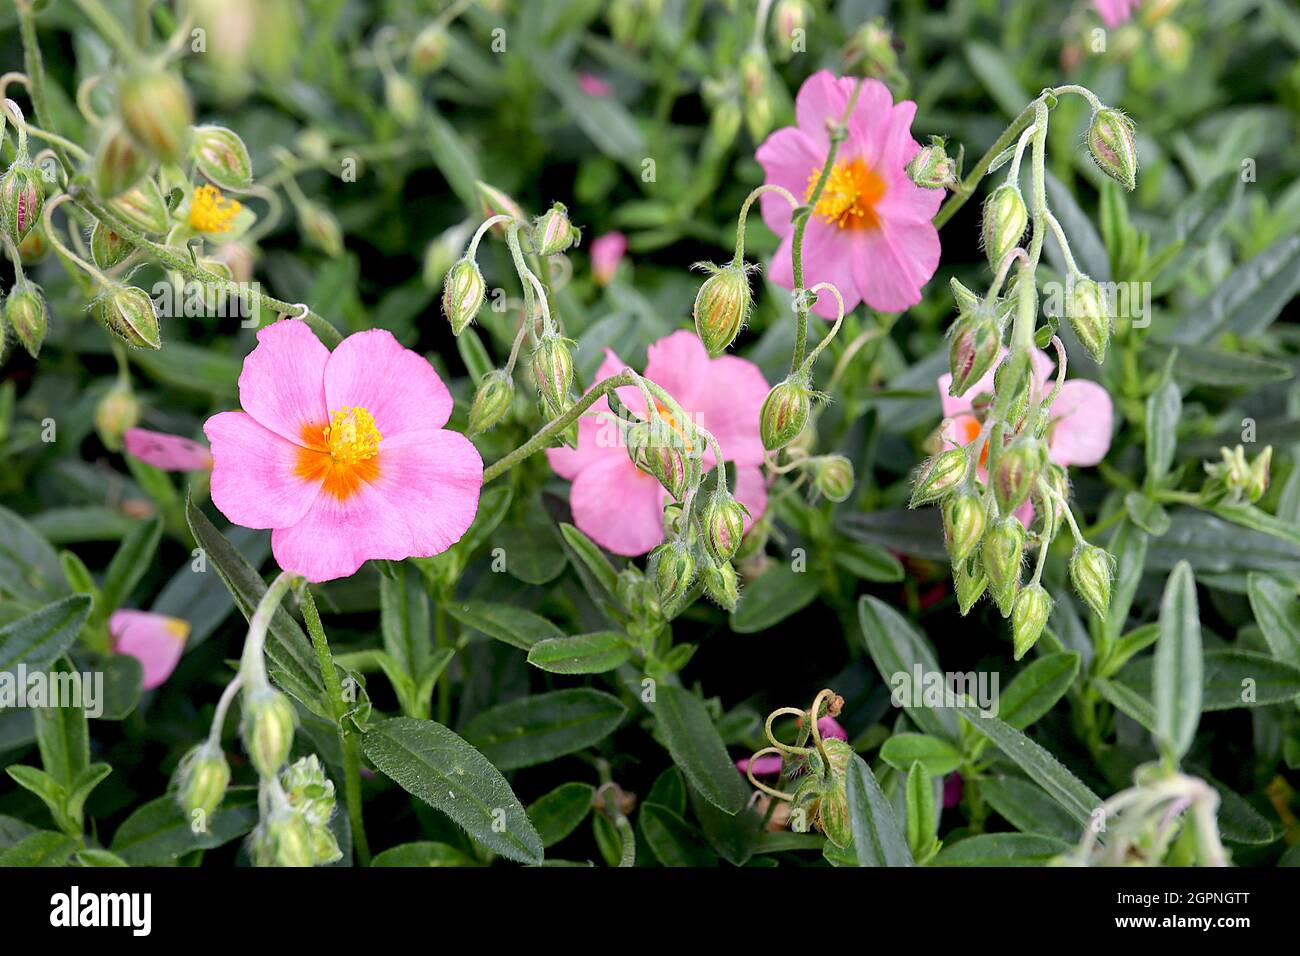 Helianthemum apenninum ‘Wisley Pink’ rock rose Wisley Pink - medium pink flowers with orange centre and dark green lance-shaped leaves with ridged Stock Photo